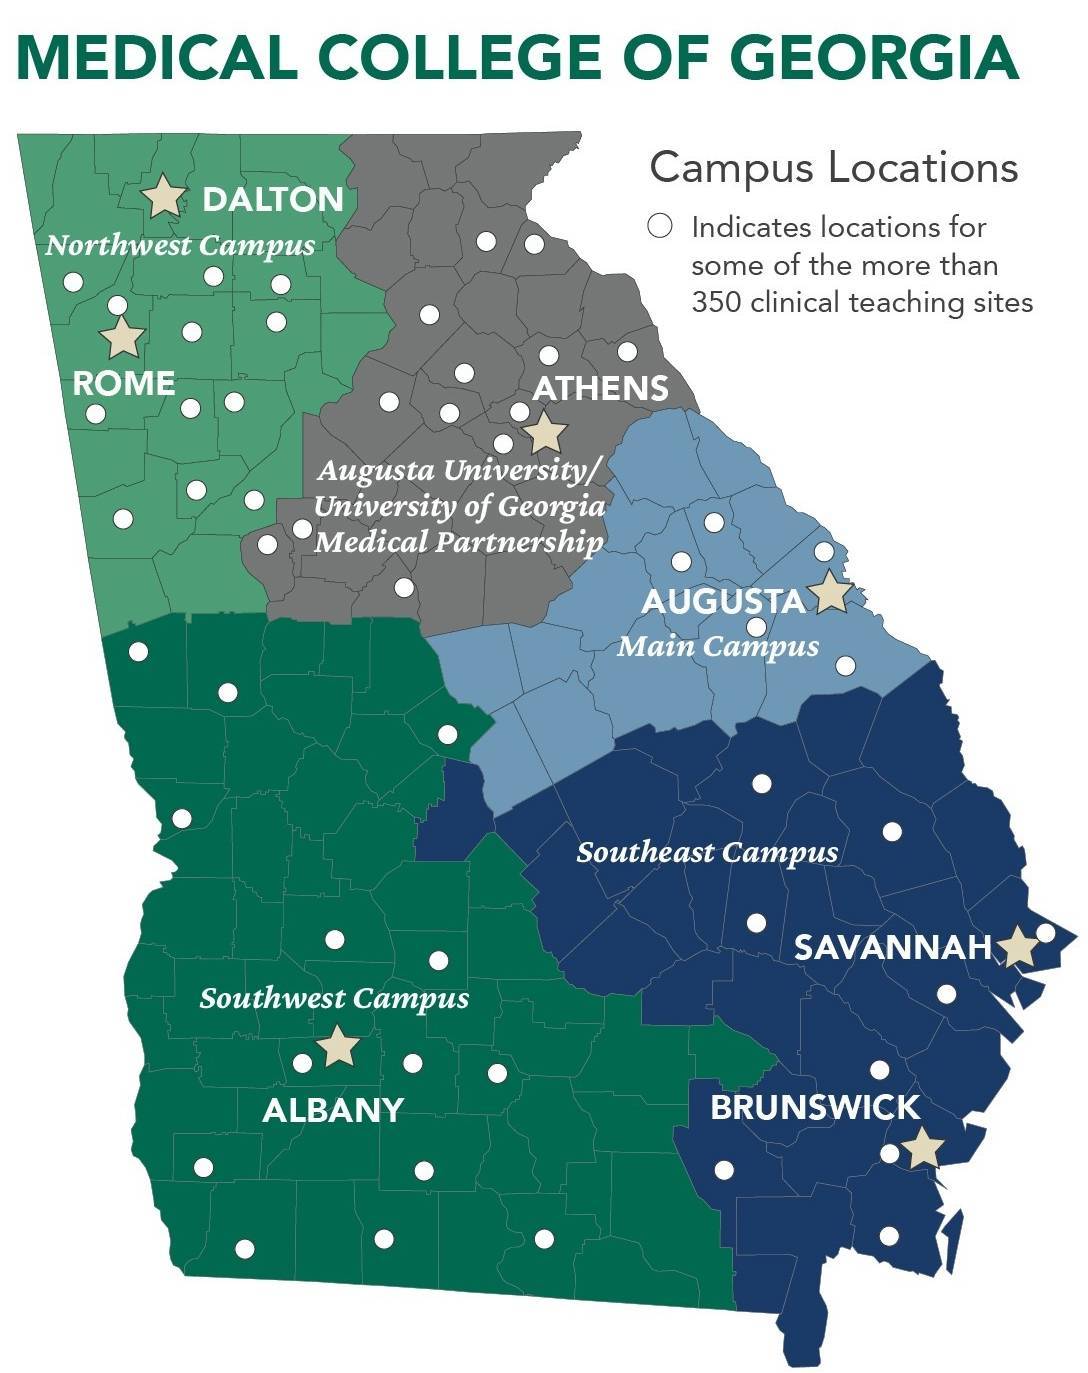 Medical College of Georgia- Campus Locations: Indicates Locations of some of the more 350 clinical teaching sites. Dalton and Rome (NorthWest Campus), Athens, Augusta University of Georgia Medical Partnership, Augusta (main campus), Savannah and Brunswick (Southeast Campus), Albany (Southwest Campus)